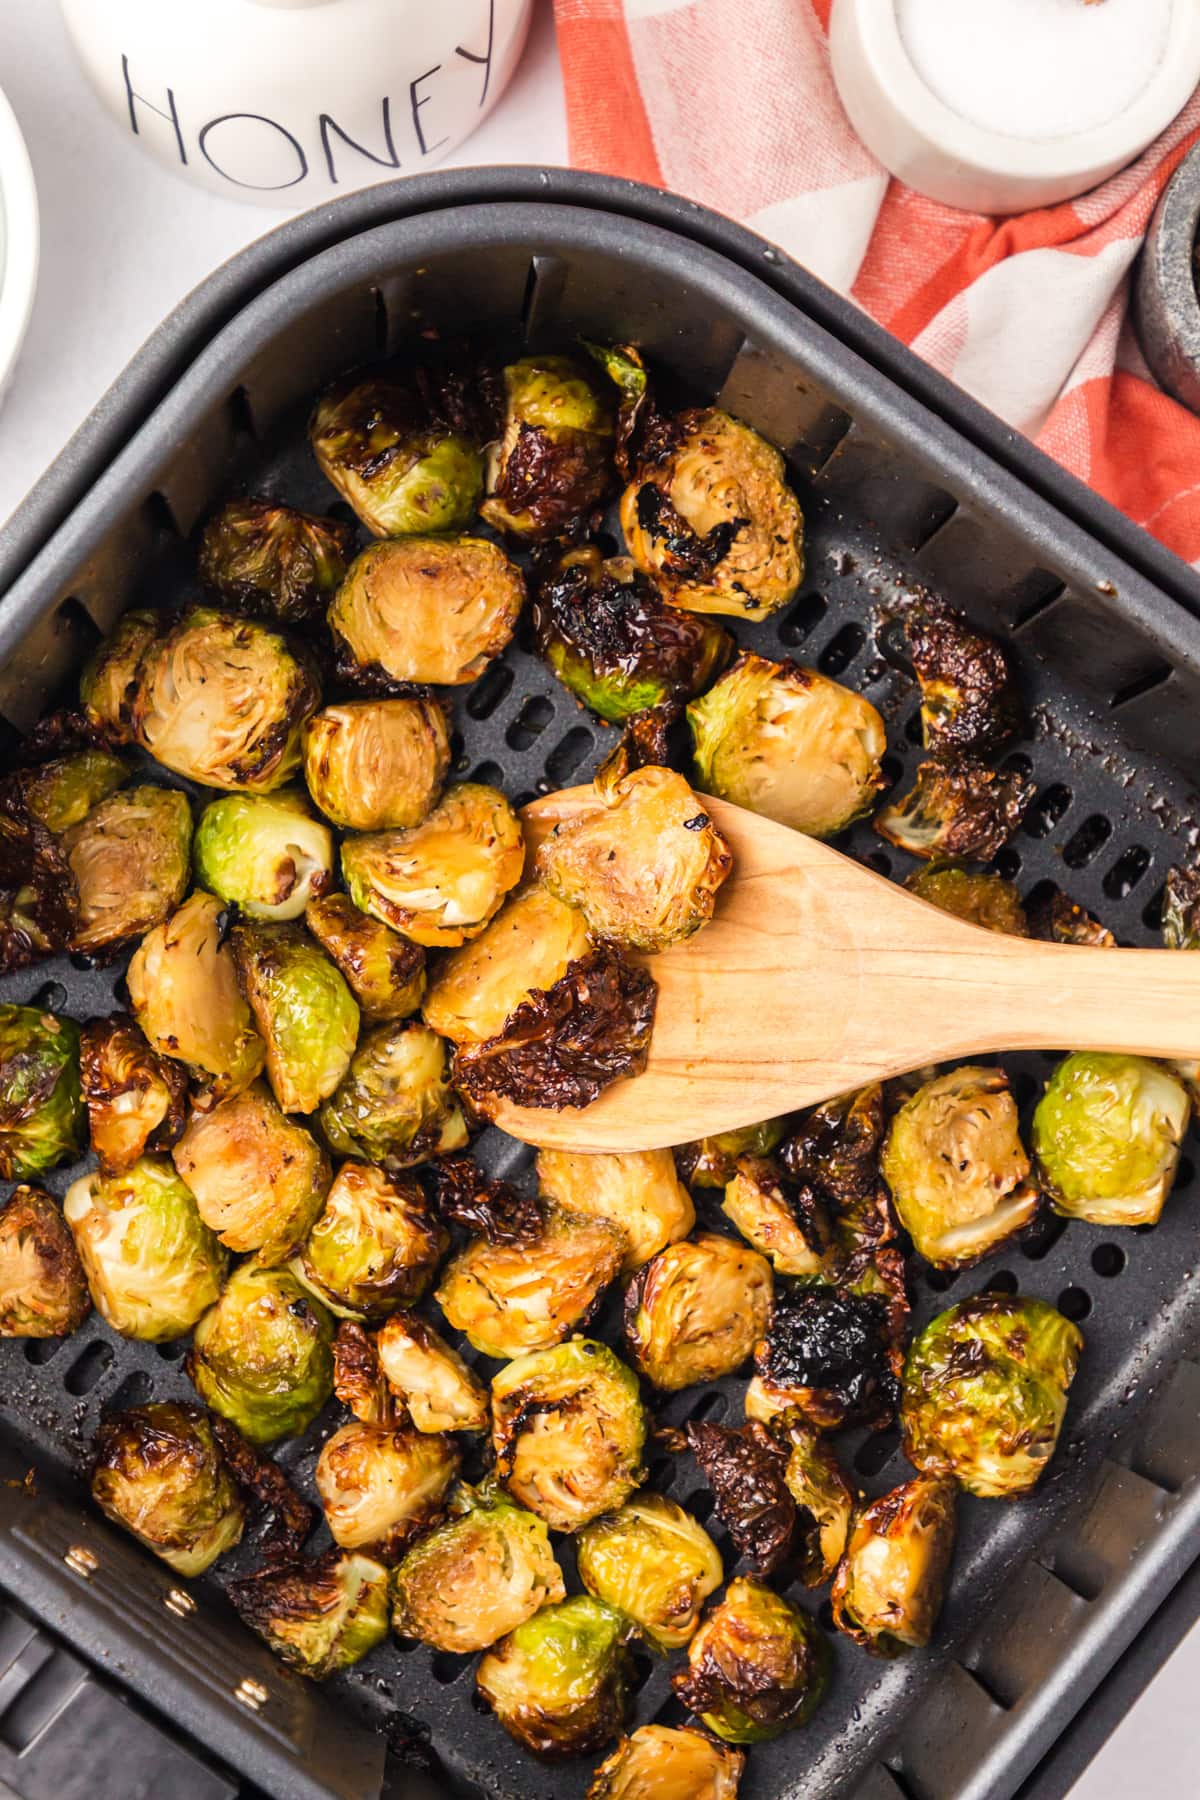 A wooden spoon stirring brussels sprouts in the air fryer